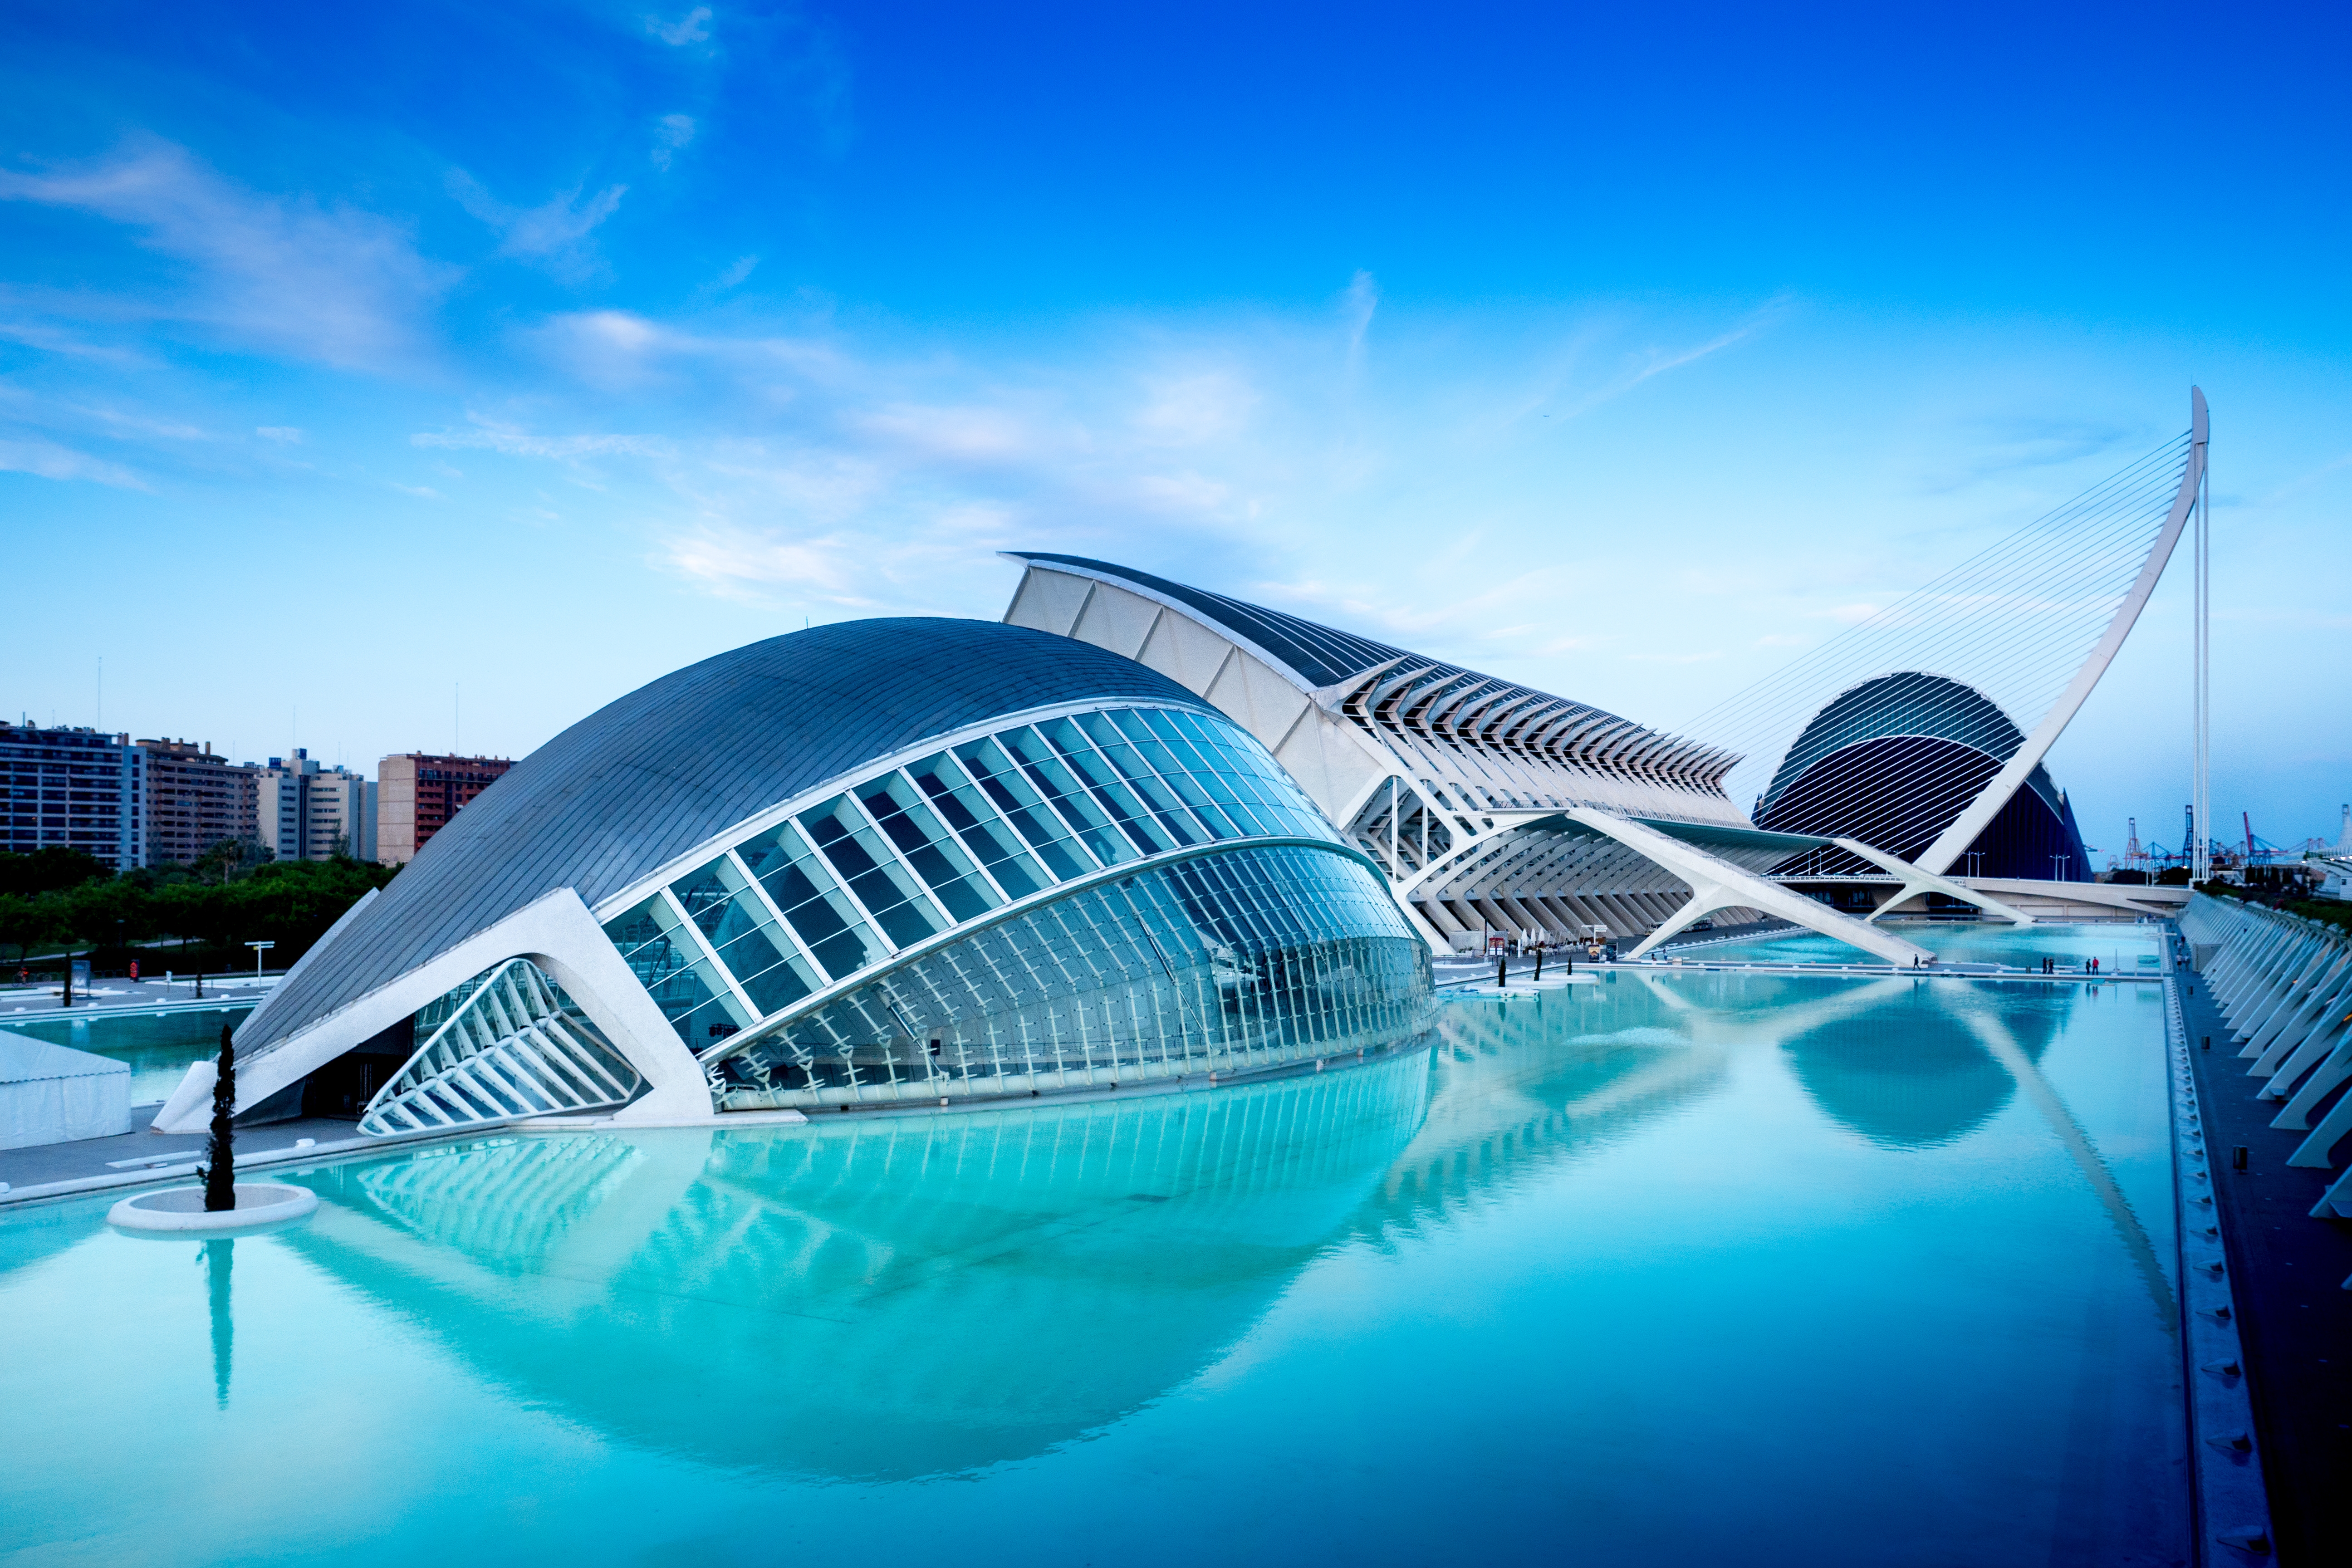 HD wallpaper, Spain, City Of Arts And Sciences, 5K, Water, Valencia, Pool, Evening, Blue Hour, Reflection, Sky View